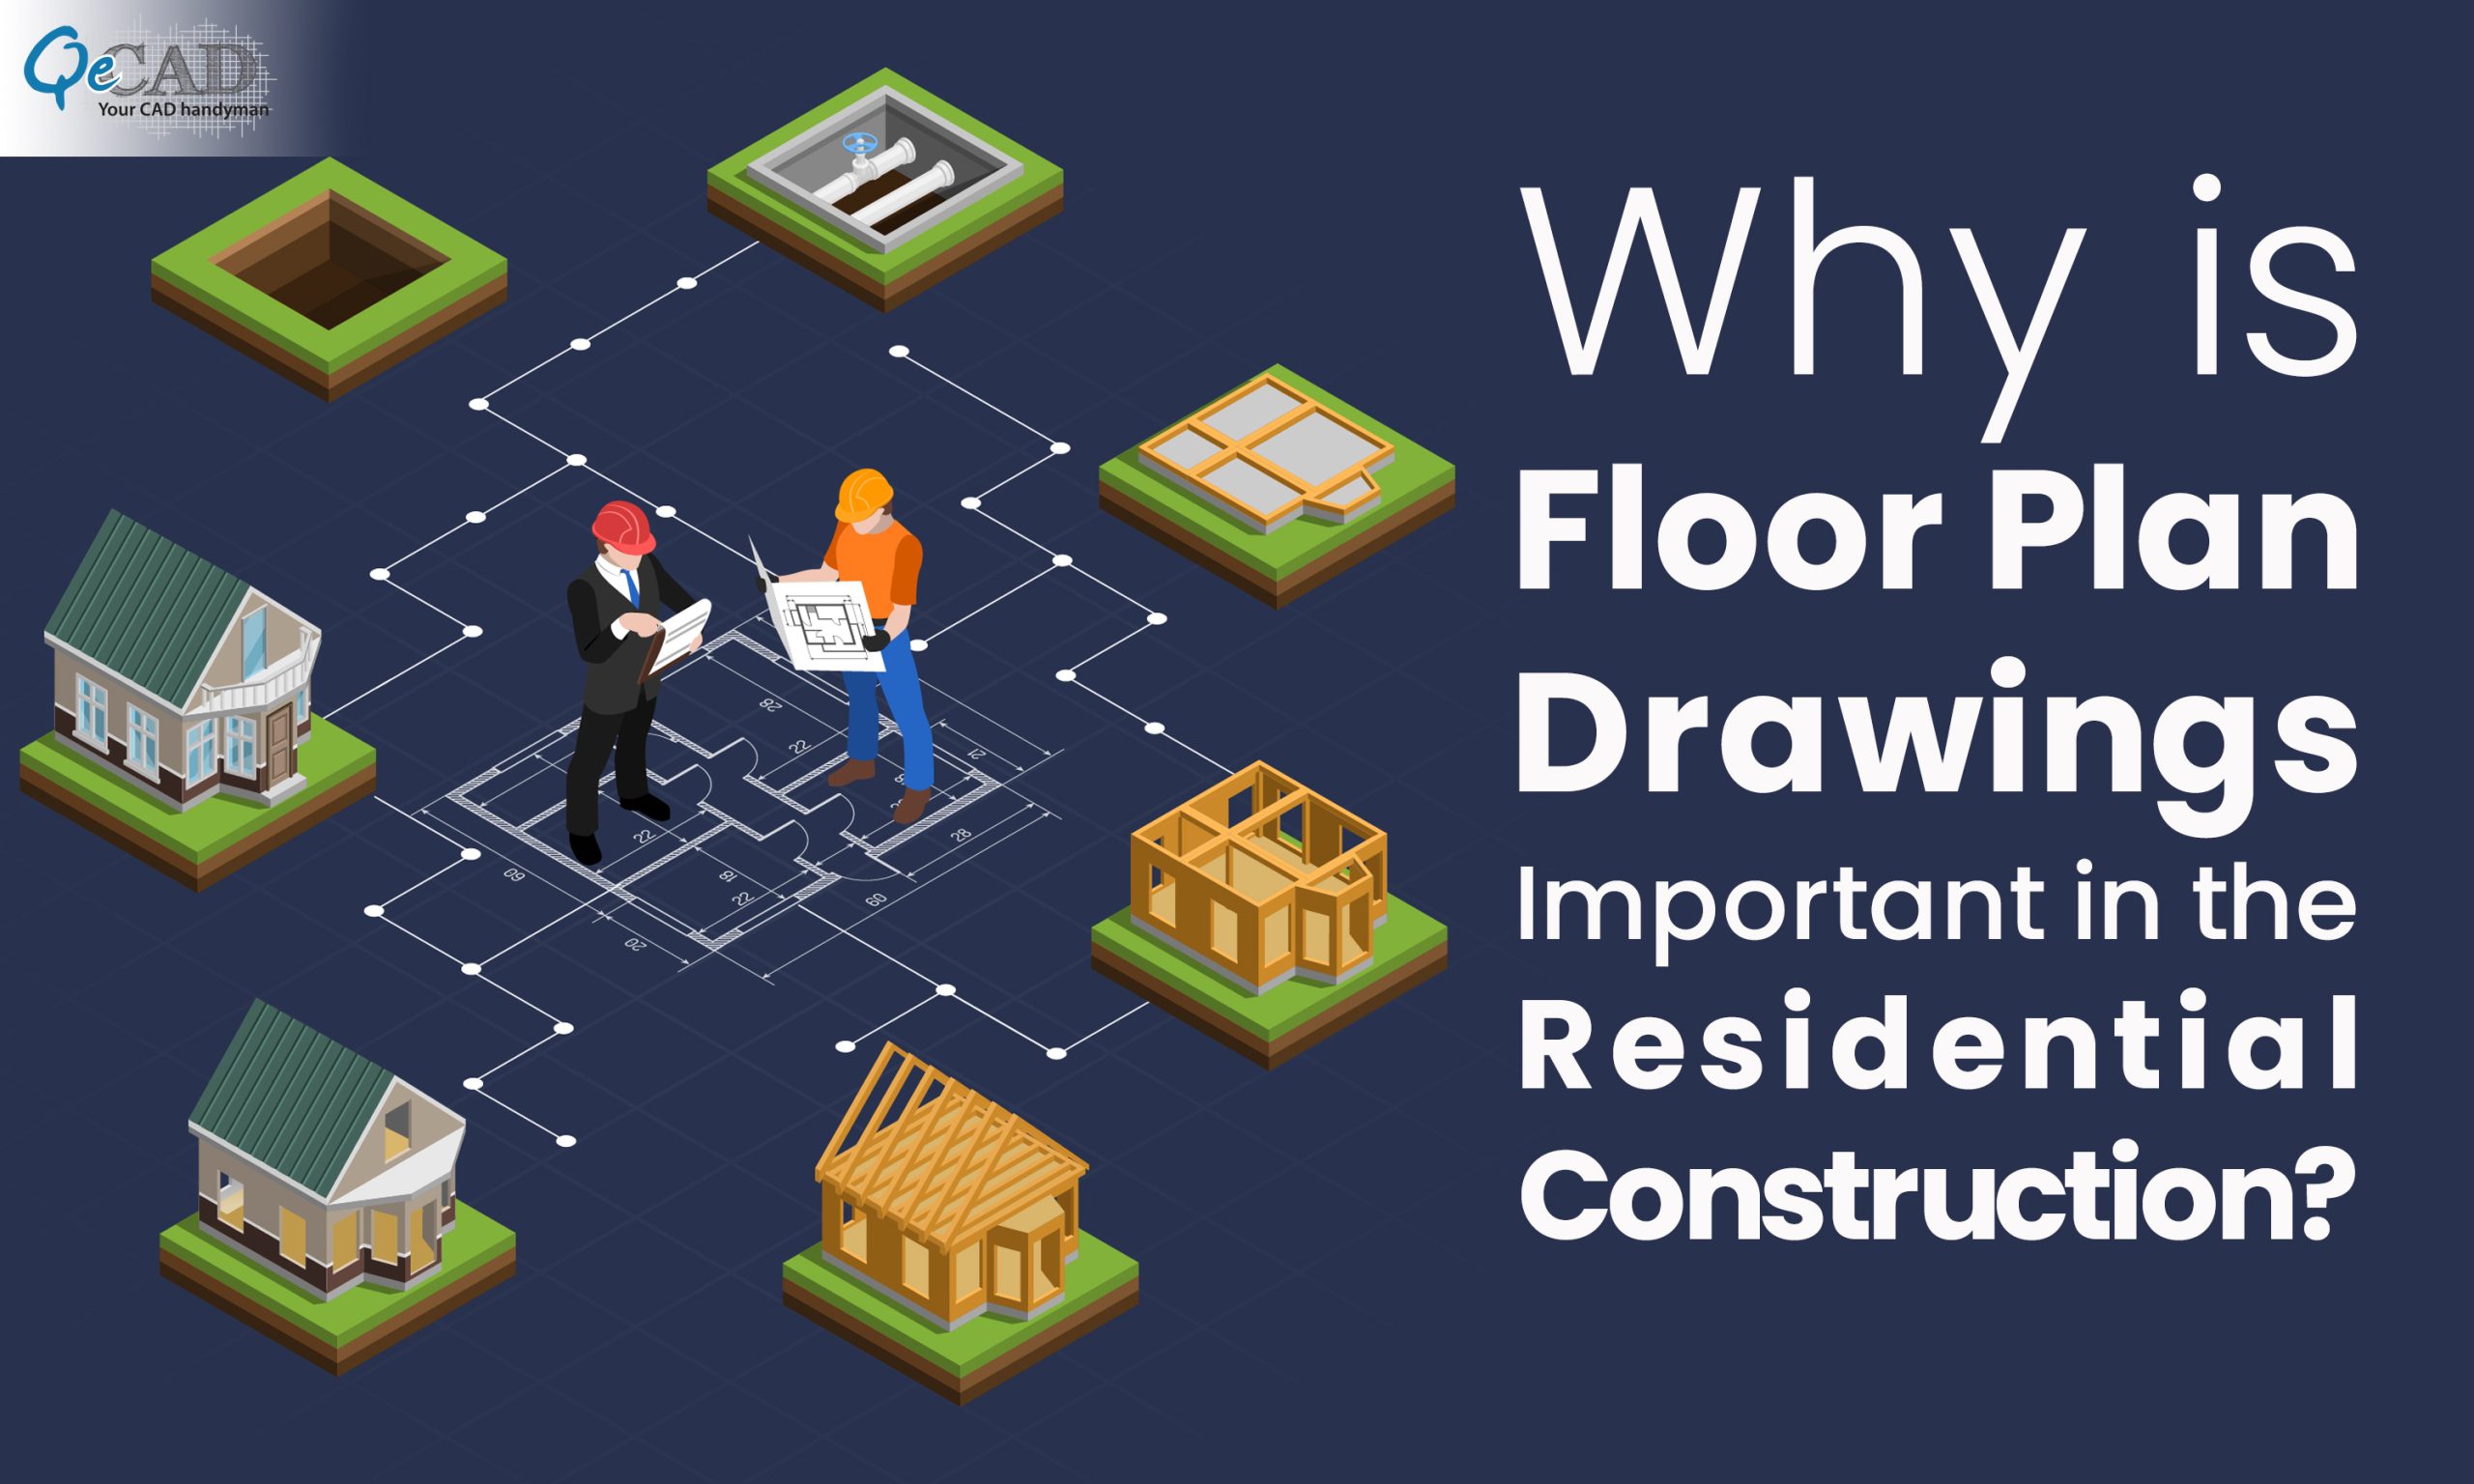 Why is Floor Plan Drawings Important in the Residential Construction?